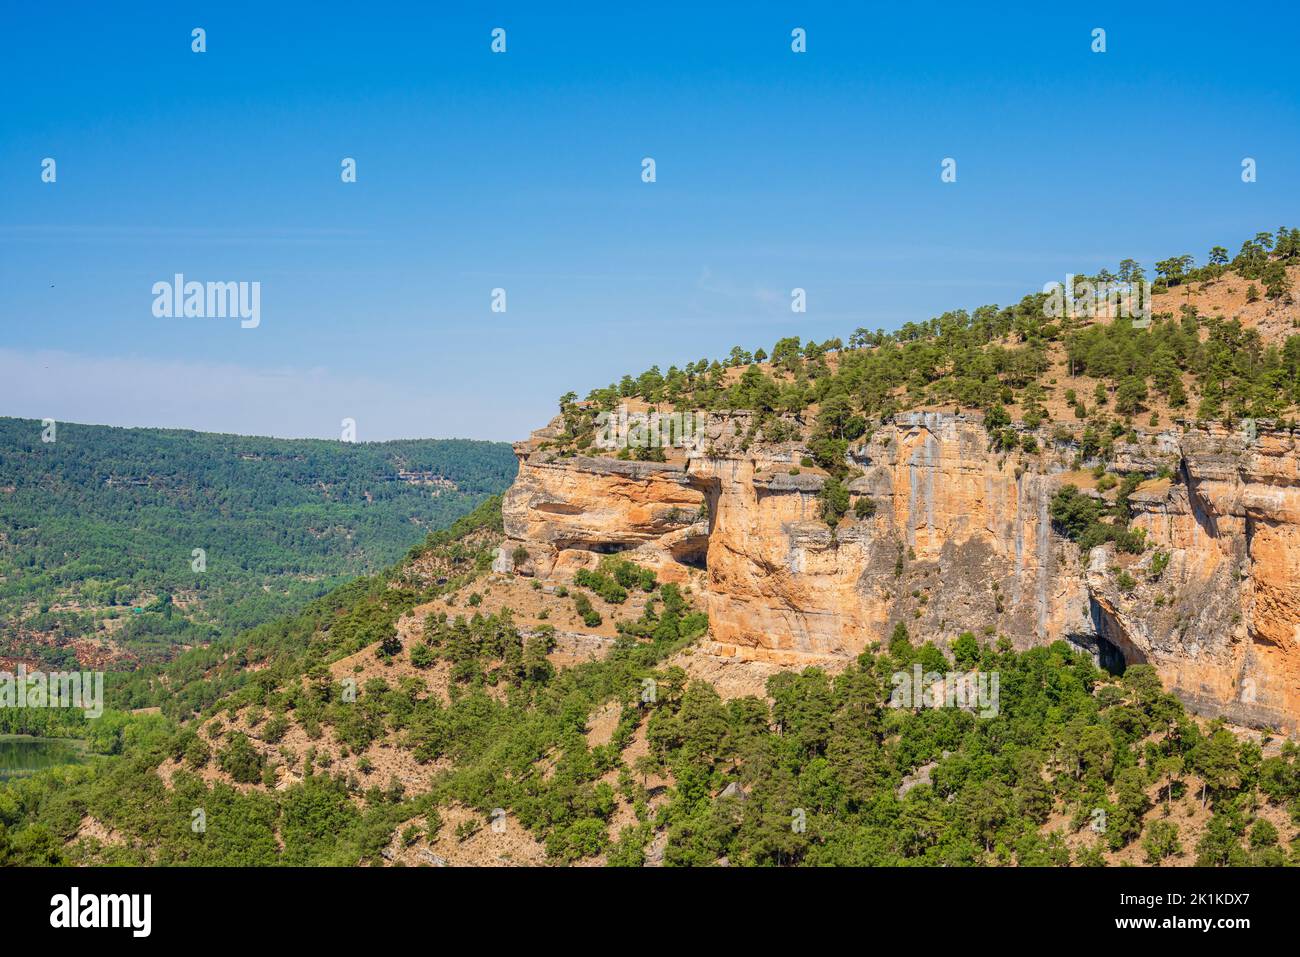 Landscape of the Serrania de Cuenca. Karst eroded by water and coniferous forests Stock Photo